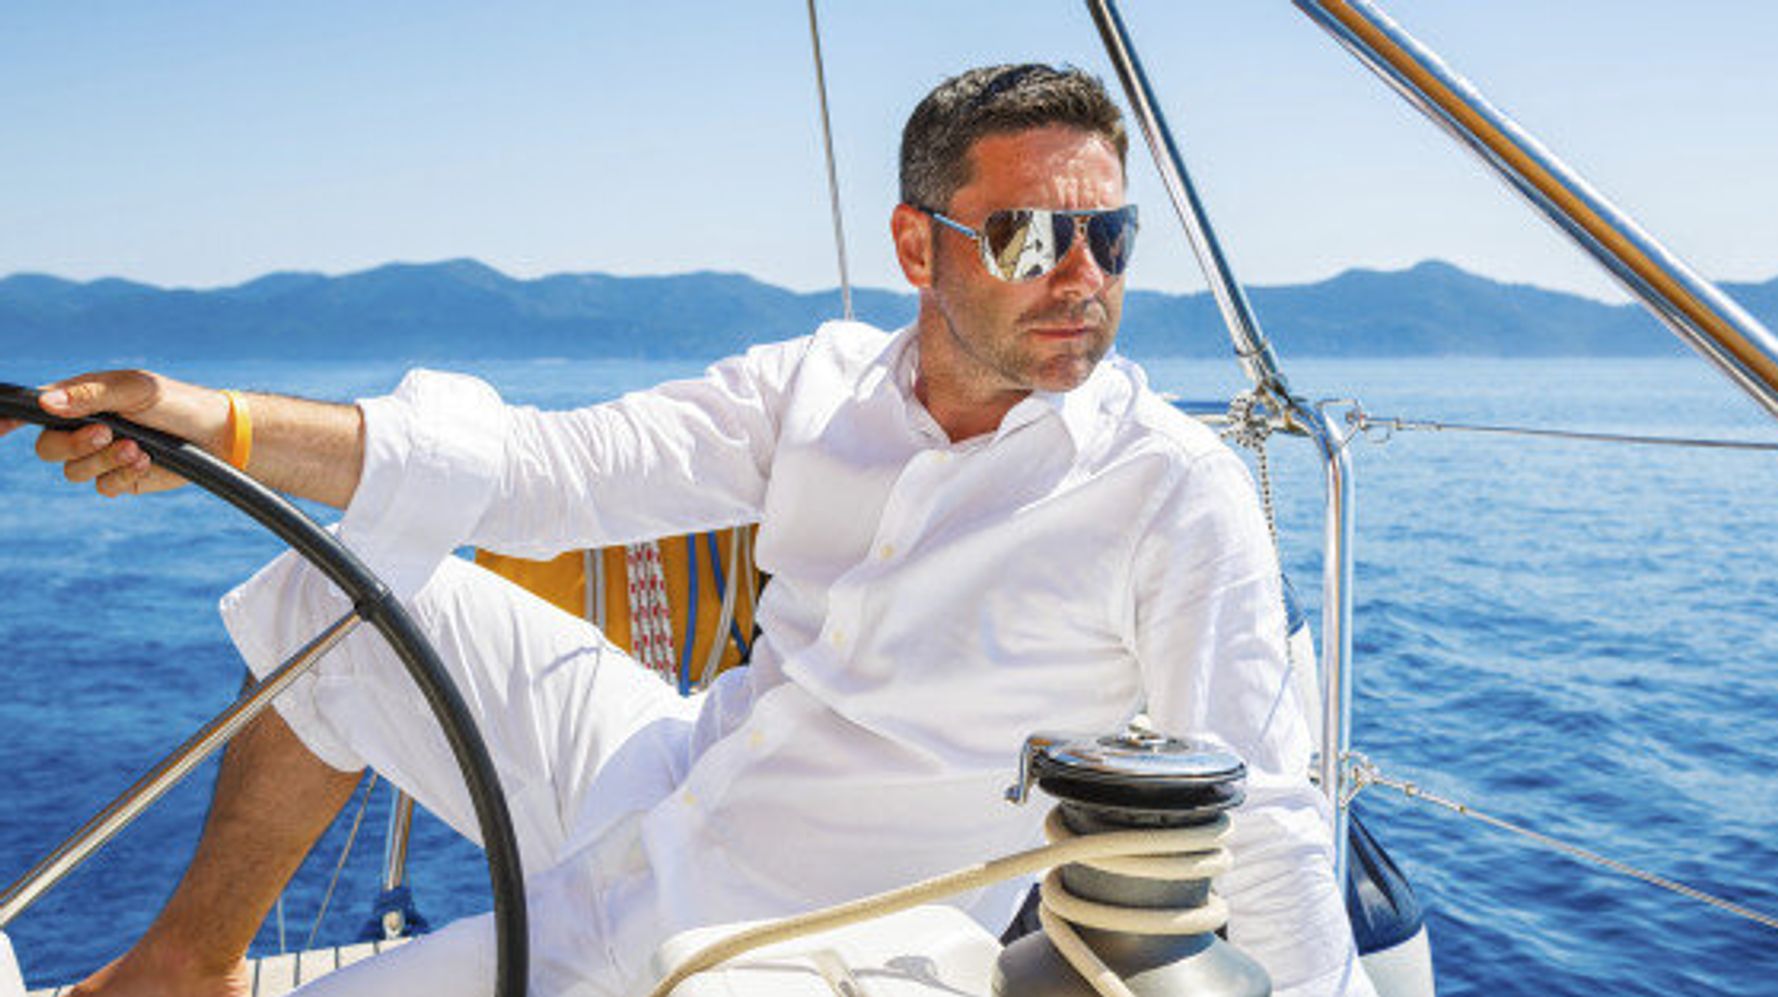 Four reasons to hold a party on a yacht & what to wear - TravelDailyNews  International